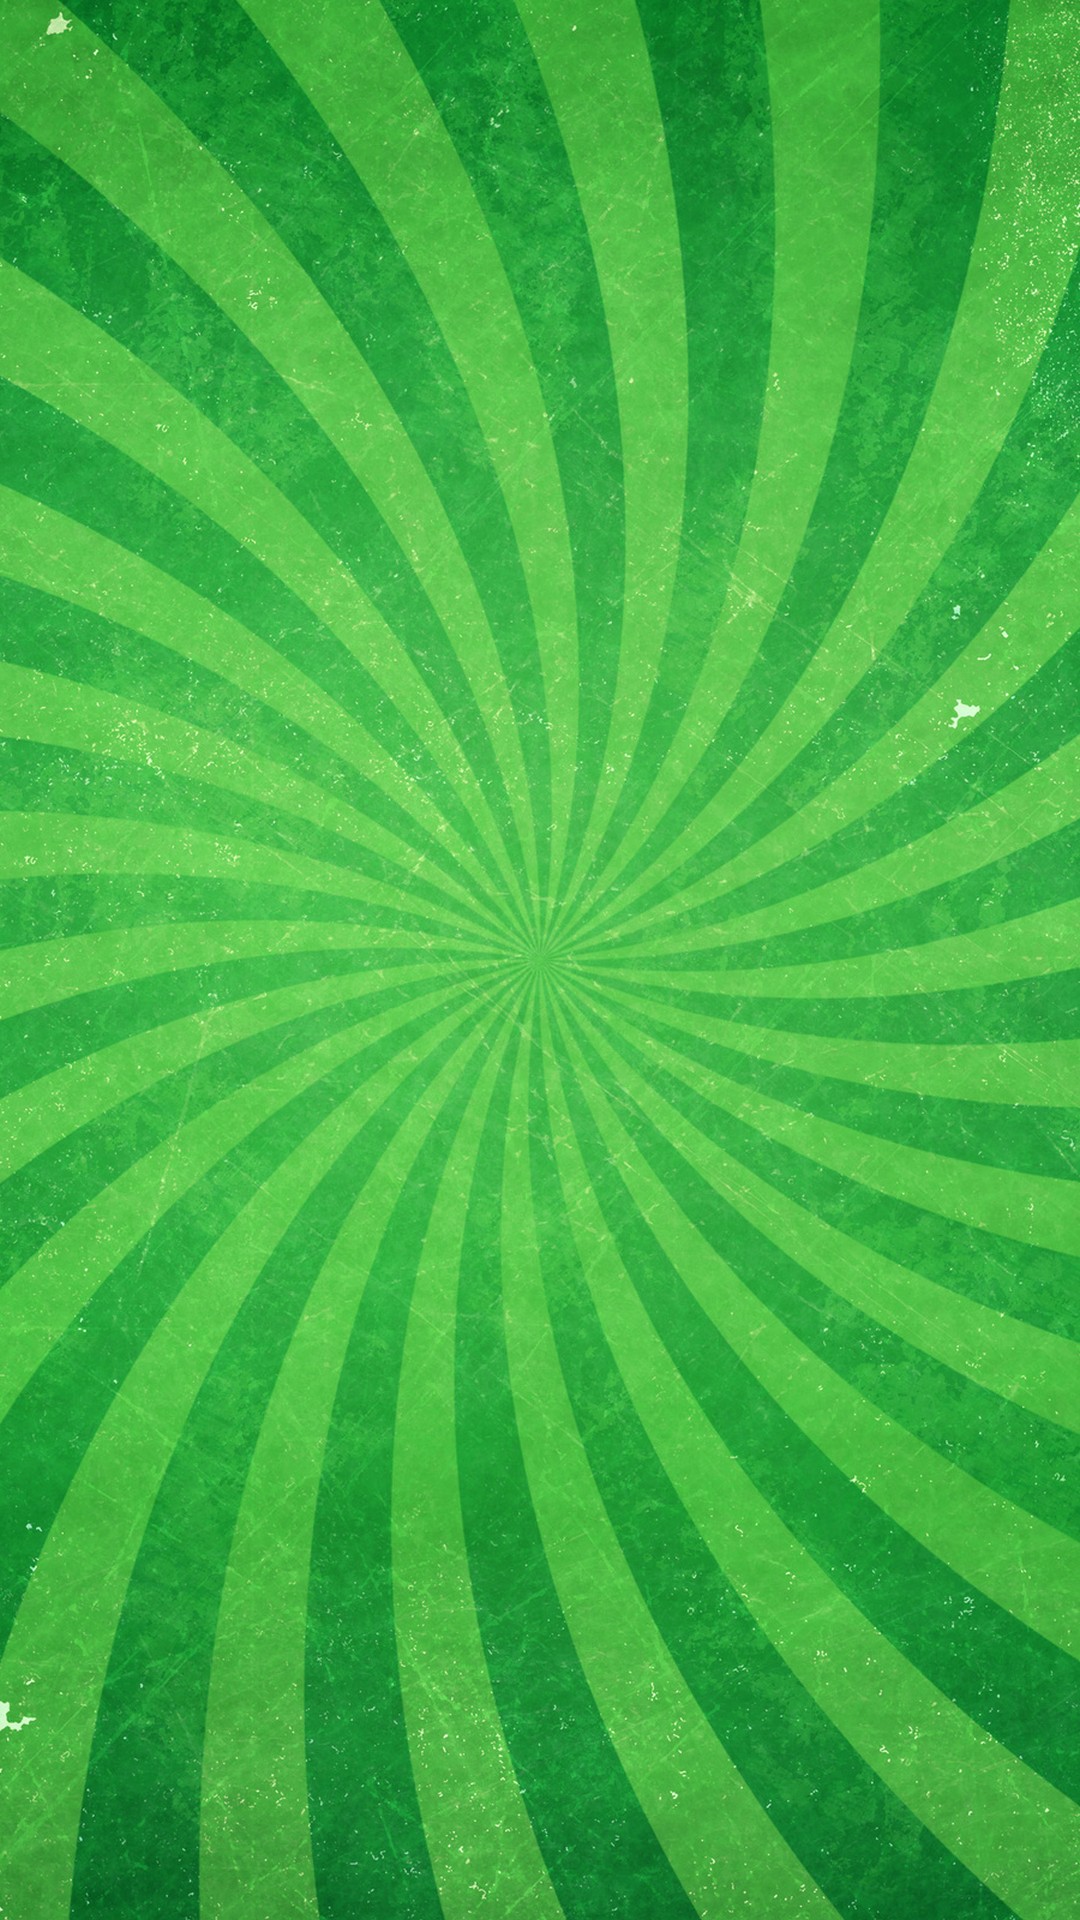 Wallpaper Green iPhone with resolution 1080X1920 pixel. You can make this wallpaper for your iPhone 5, 6, 7, 8, X backgrounds, Mobile Screensaver, or iPad Lock Screen